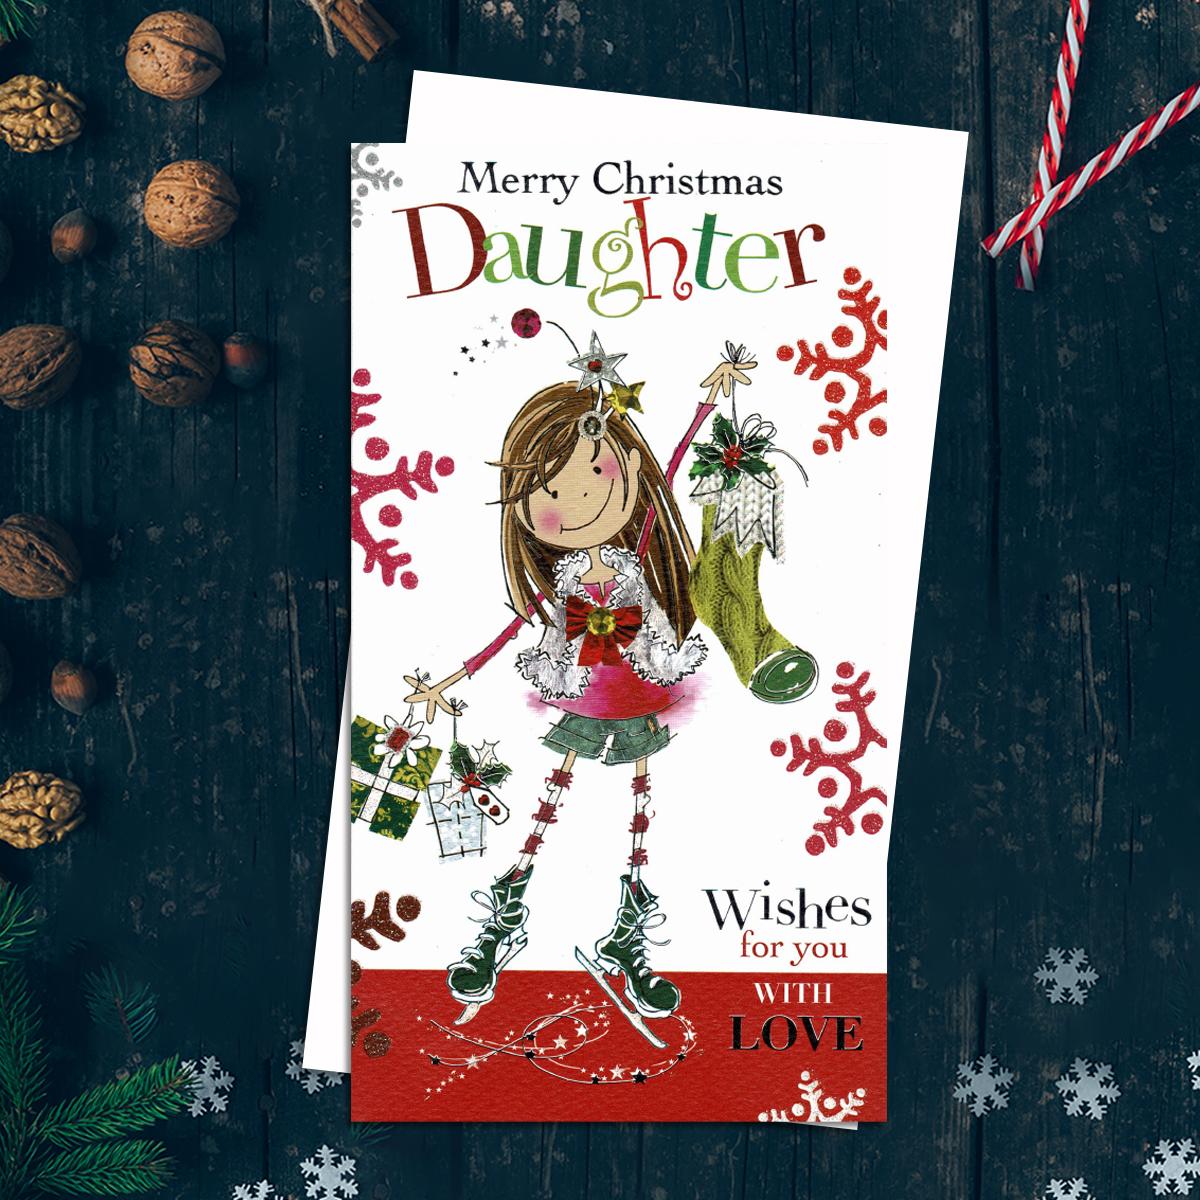 Merry Christmas Daughter Wishes For You With Love Featuring A Cartoon Like Young Girl On Ice Skates With Stocking And Gifts! Finished With Silver Foil Details And Added Sparkle